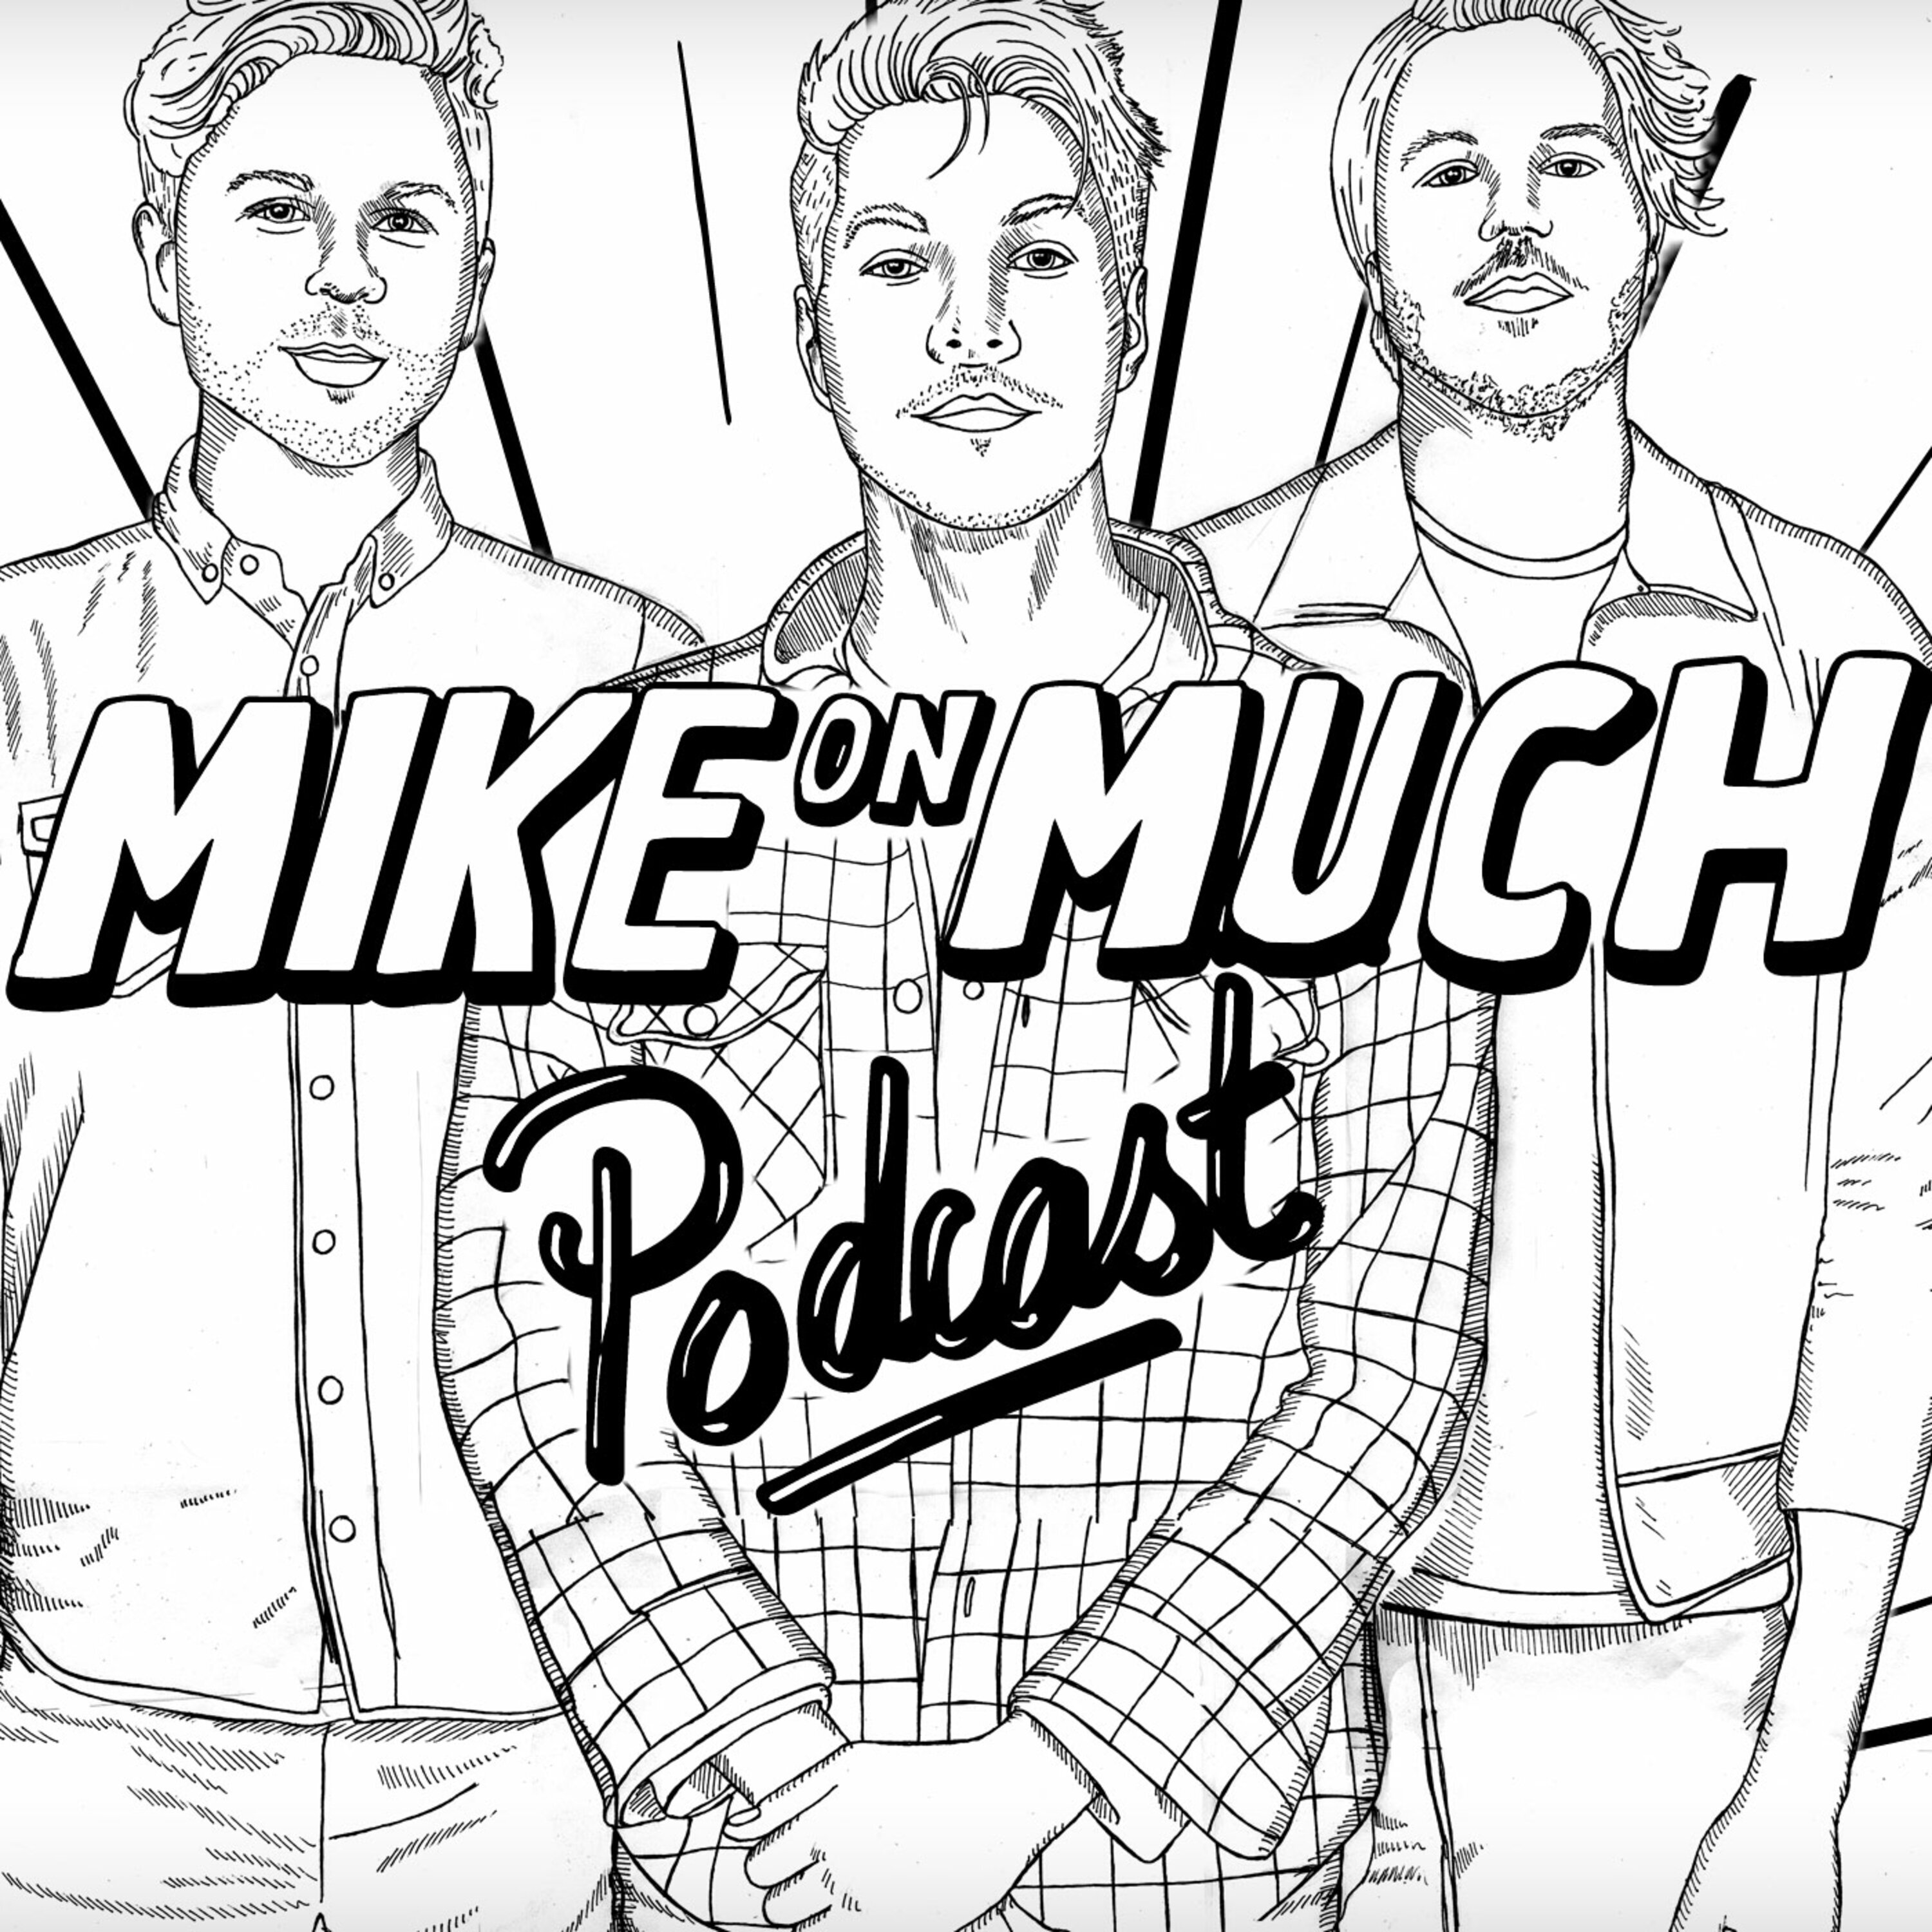 Season 1 Mike On Much: HOLIDAY TREAT - FEUDS